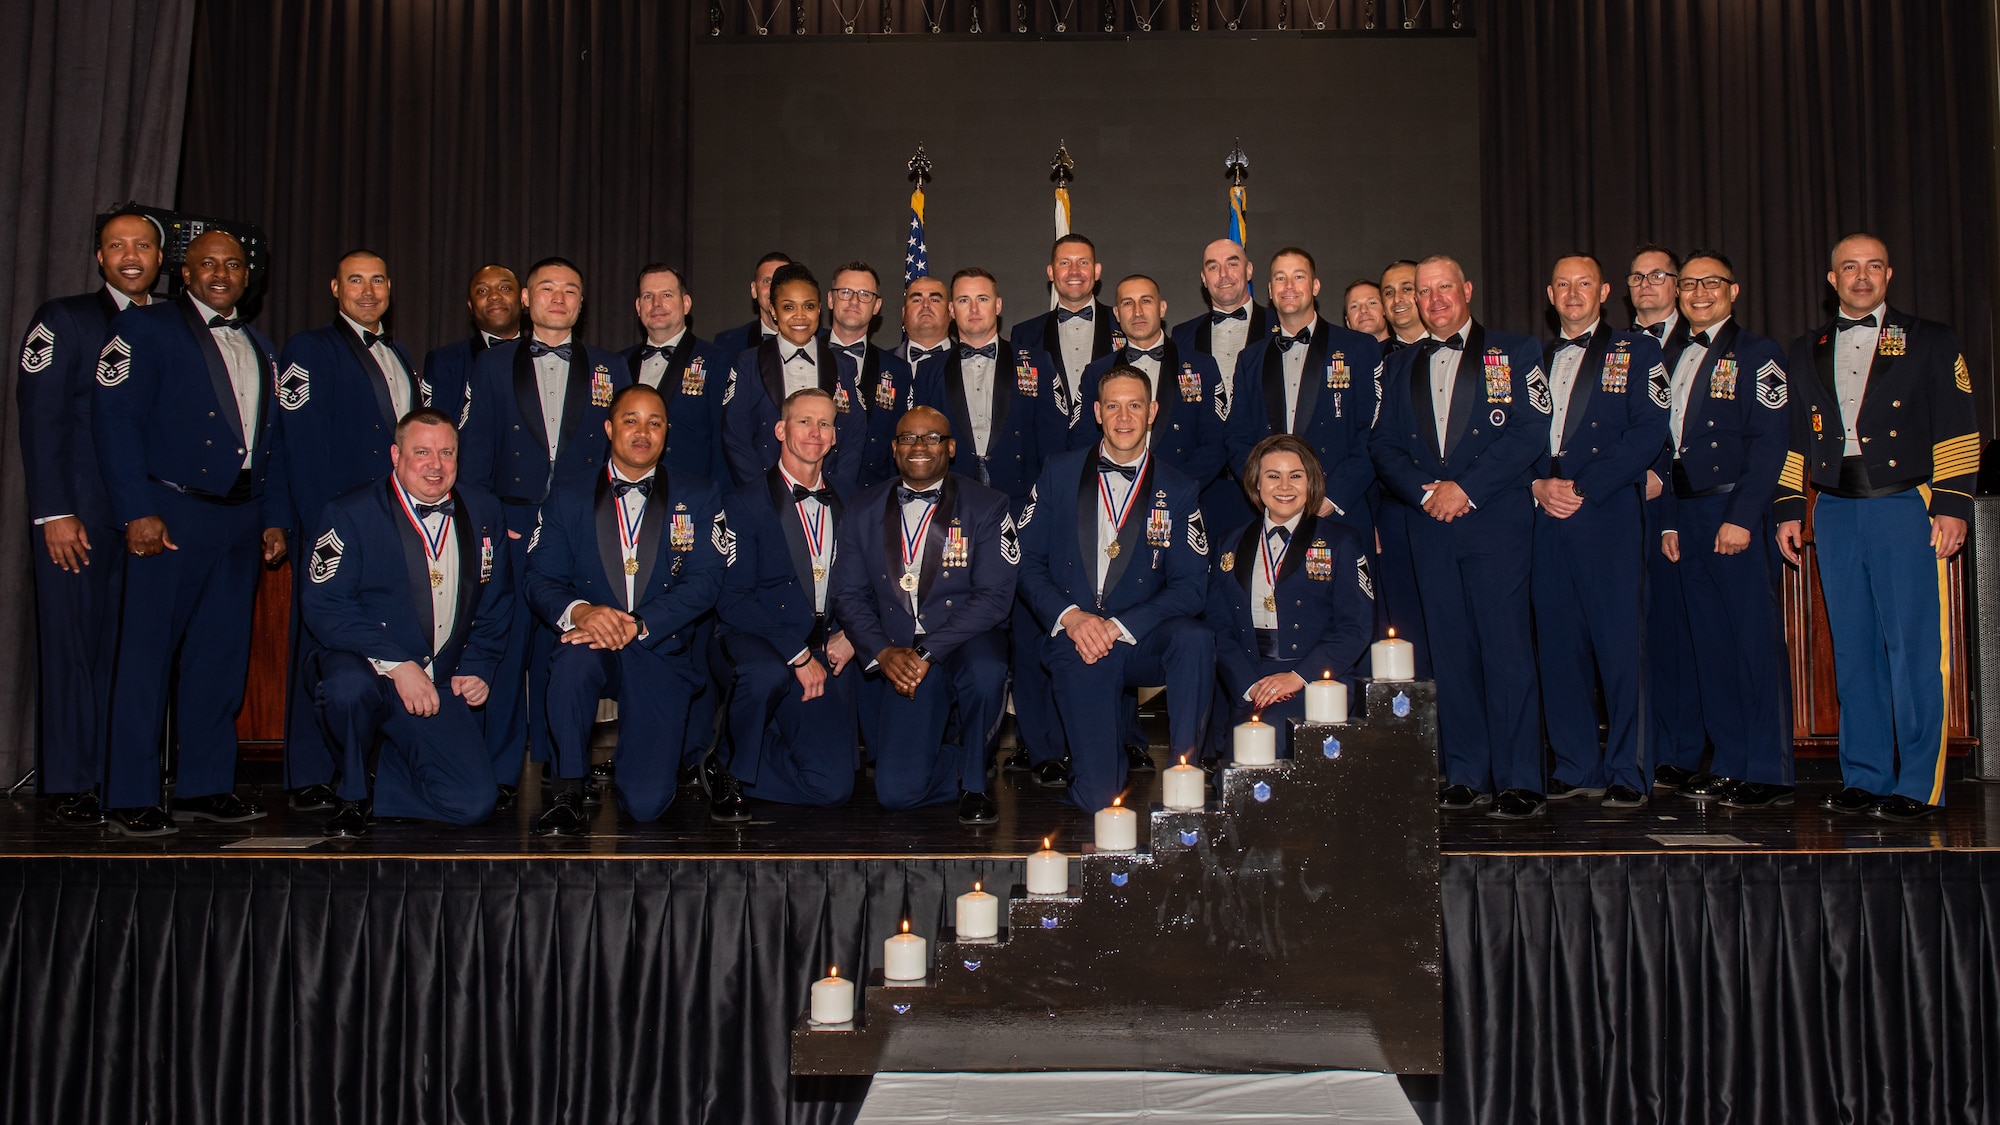 Chief Master Sergeants and selects from various groups and squadrons pose for a photo at the U.S. Air Force Chief Recognition Ceremony